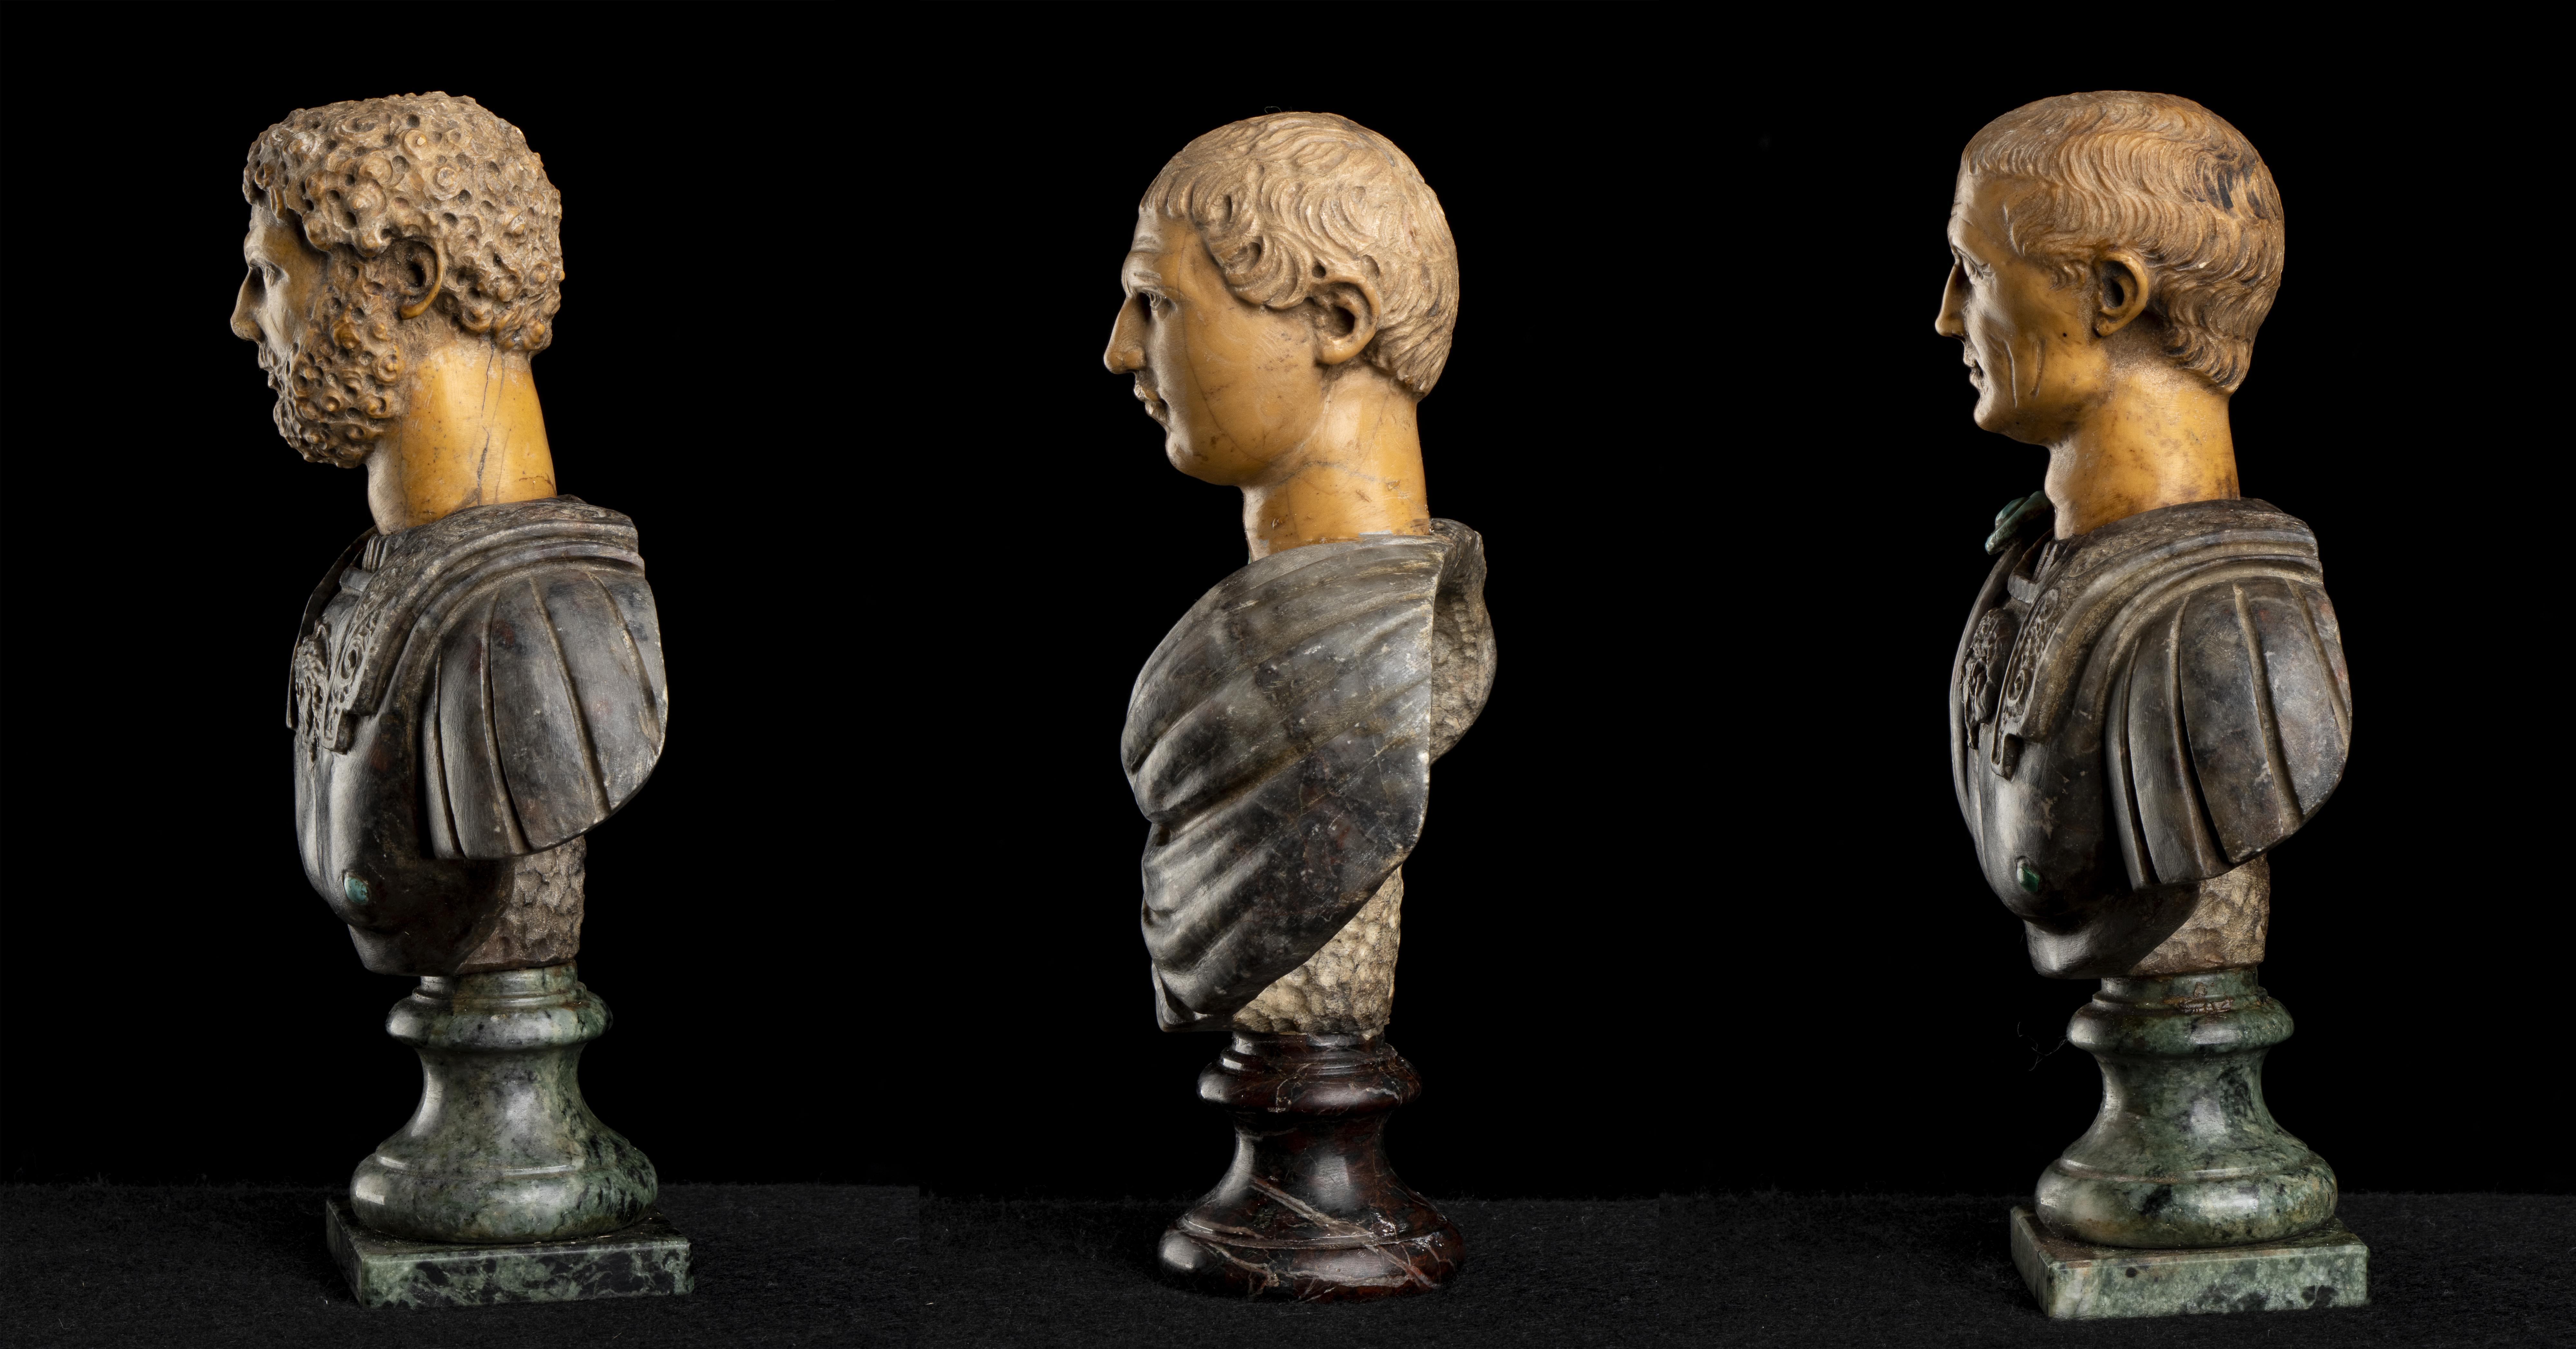 A Grand Tour Set of Three Polychrome Marble Busts Sculptures of Roman Emperors  3